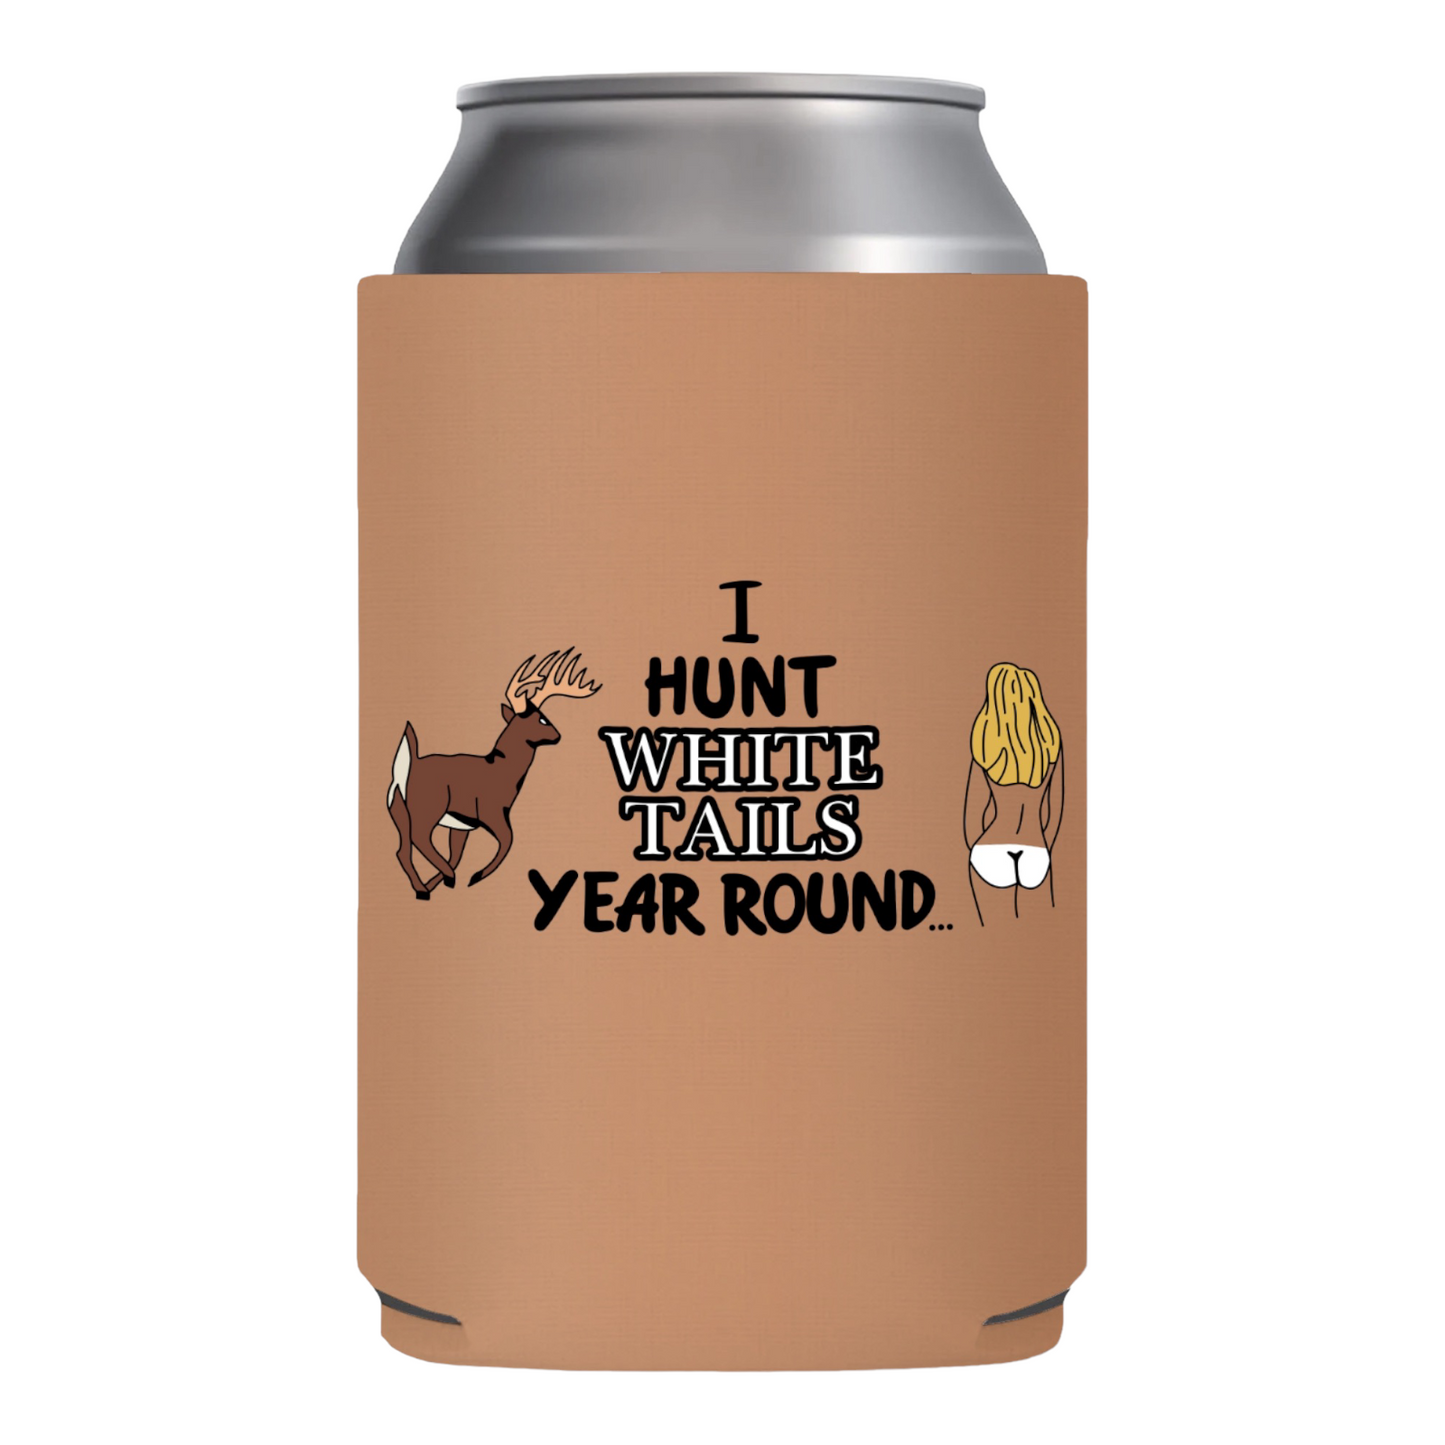 I Hunt White Tails Year Round Funny Beer Can Cooler Holder Sleeve